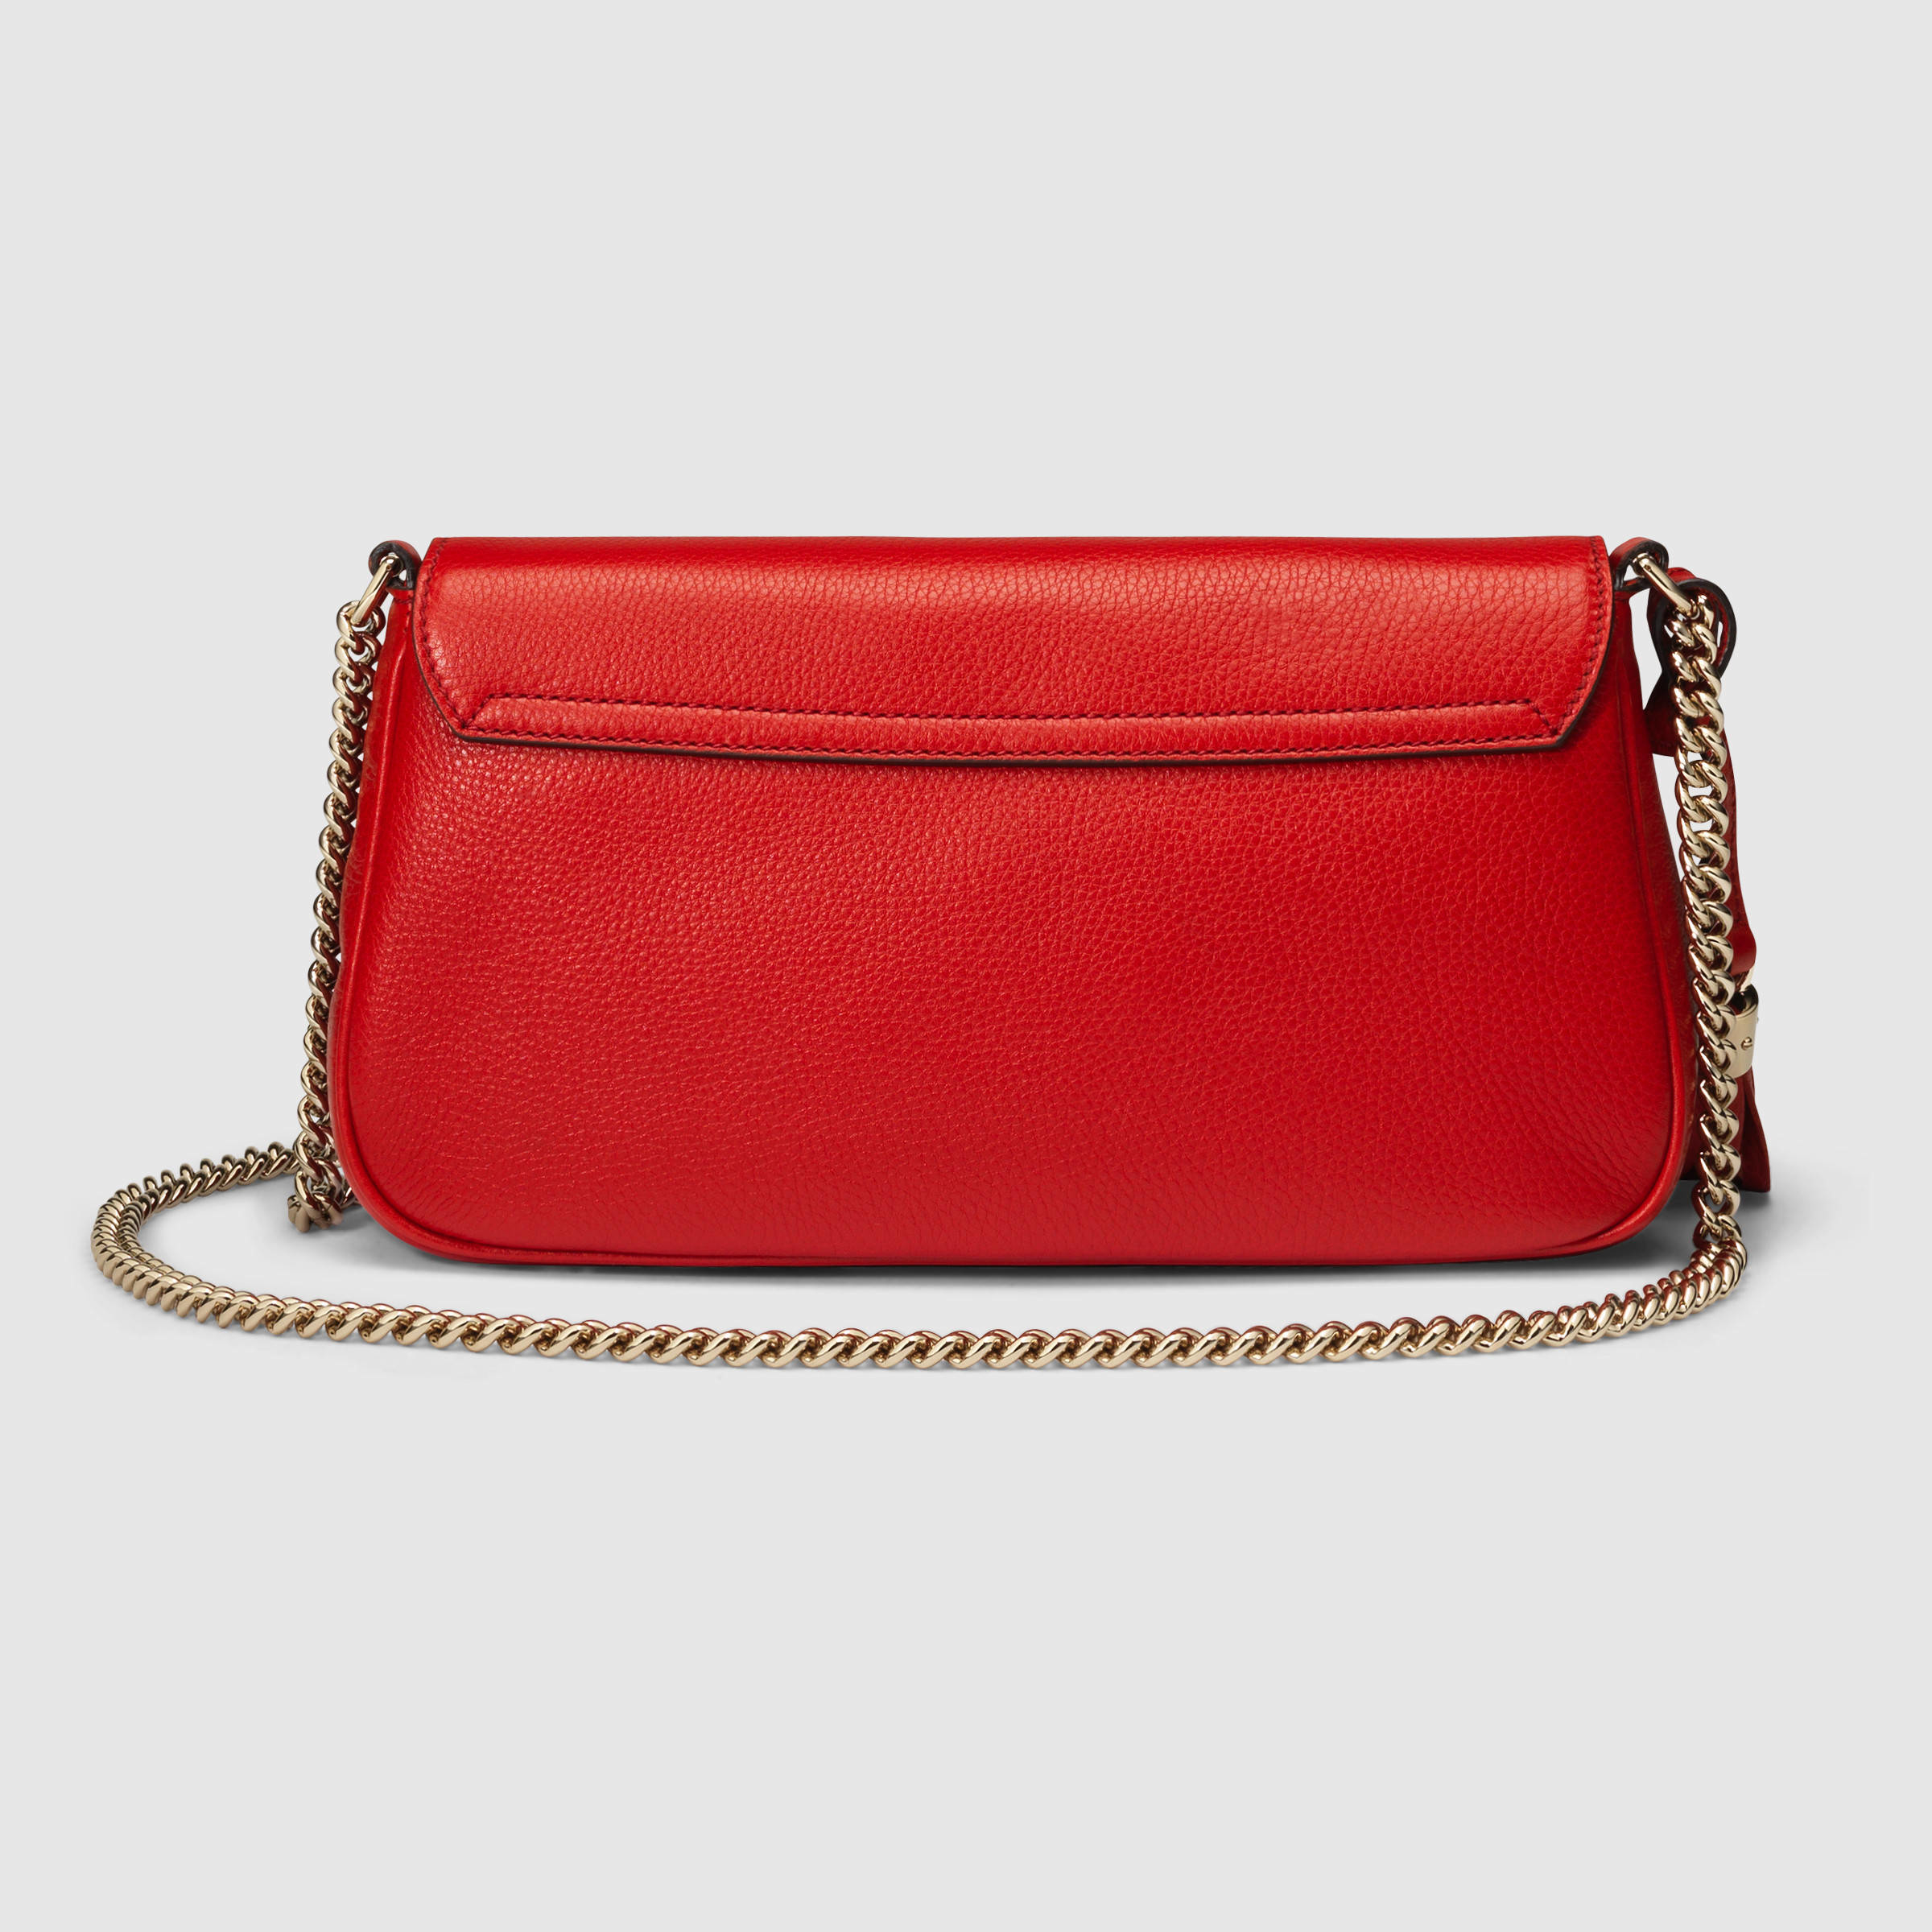 Gucci Soho Leather Shoulder Bag in Red - Lyst